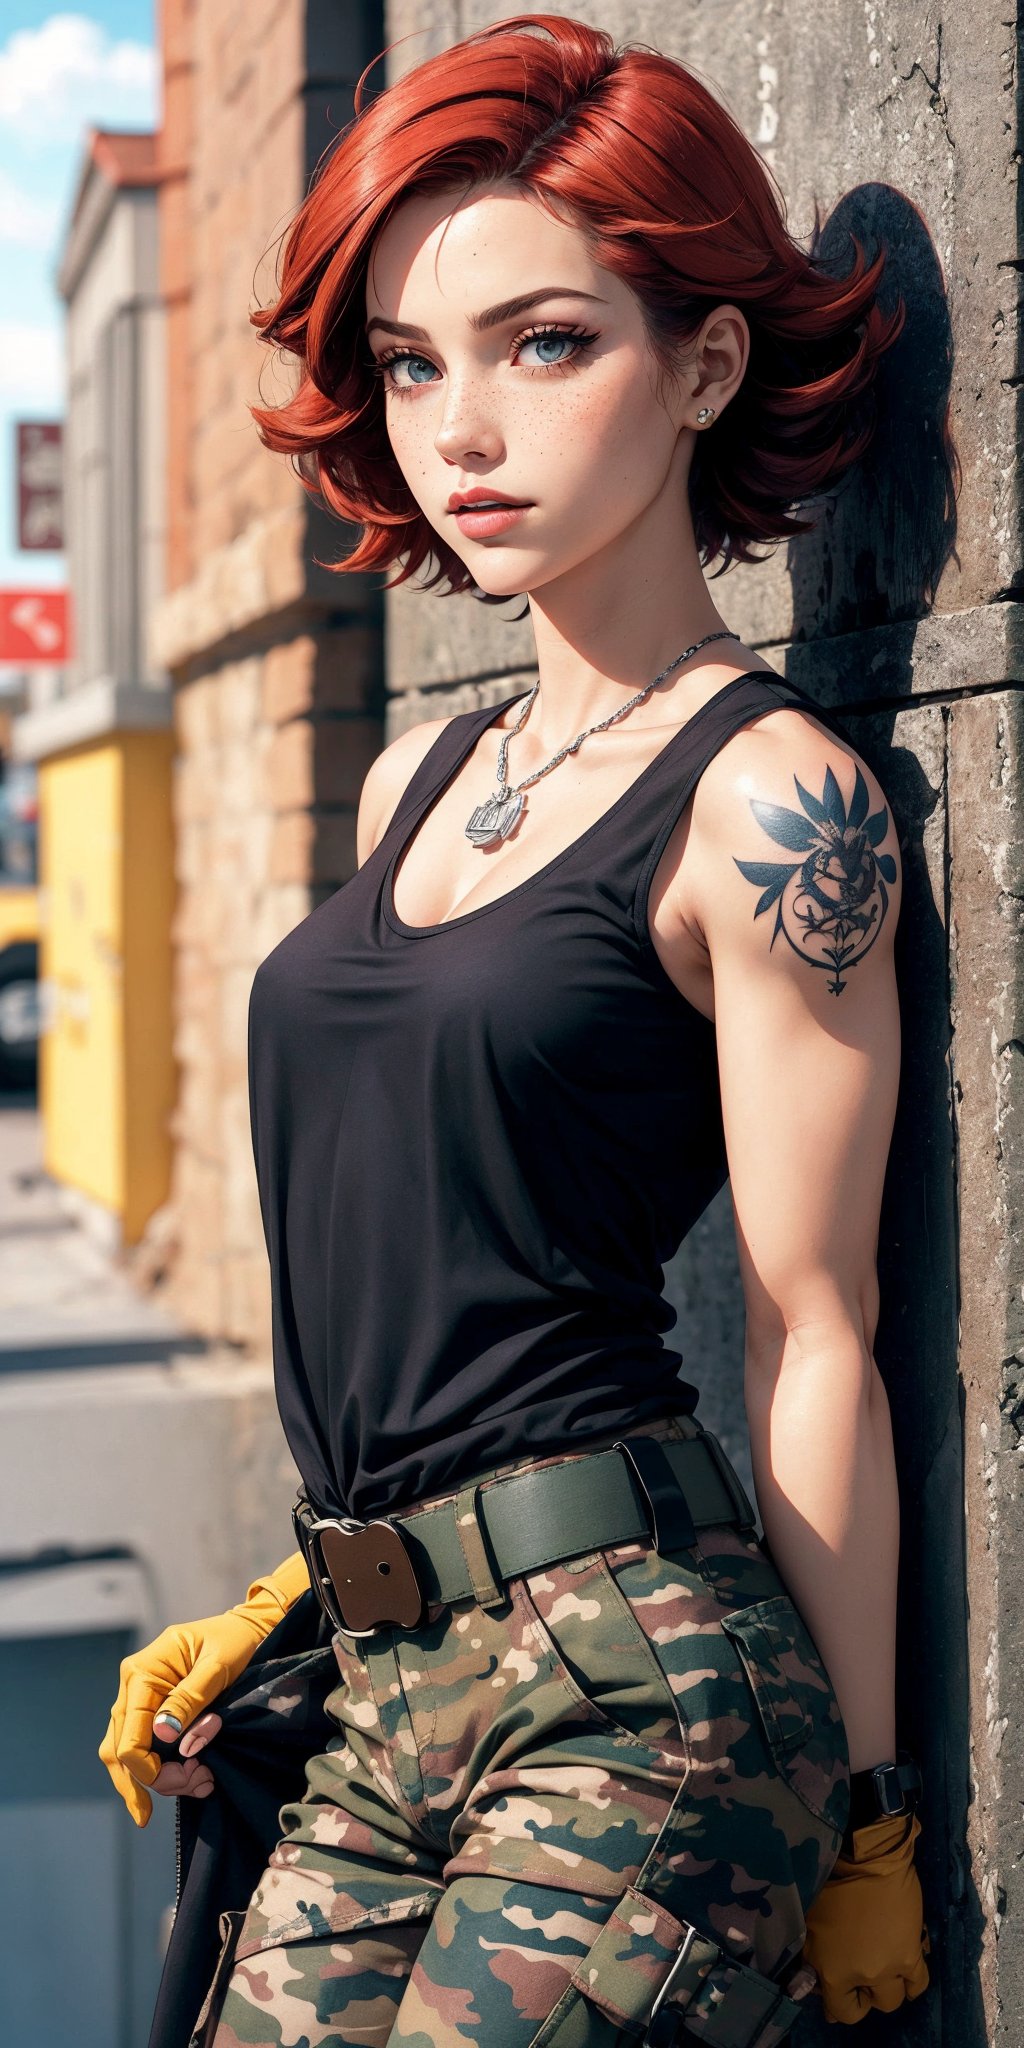 masterpiece,best quality,High quality,meryl, red hair, picture perfect face,blush, freckles,makeup,long eyelashes, perfect female body, black tank top,belt, camouflage pants, 
military arm tattoo, dogtag,
military base, 